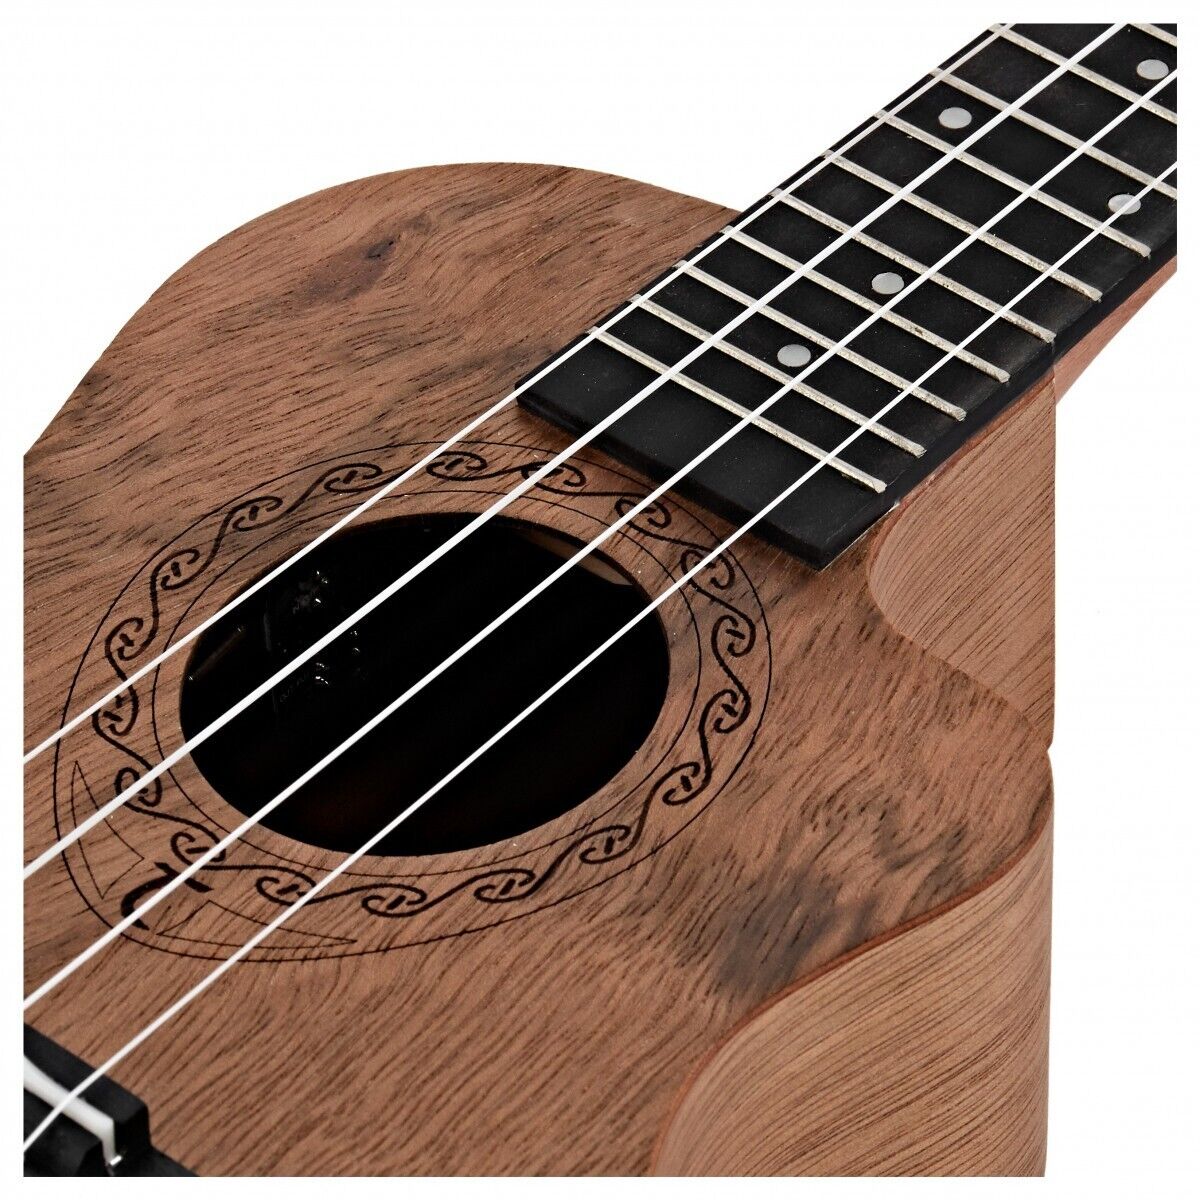 Tanglewood Tiare Electro Acoustic Concert Ukulele TWT13E with Built-In Tuner